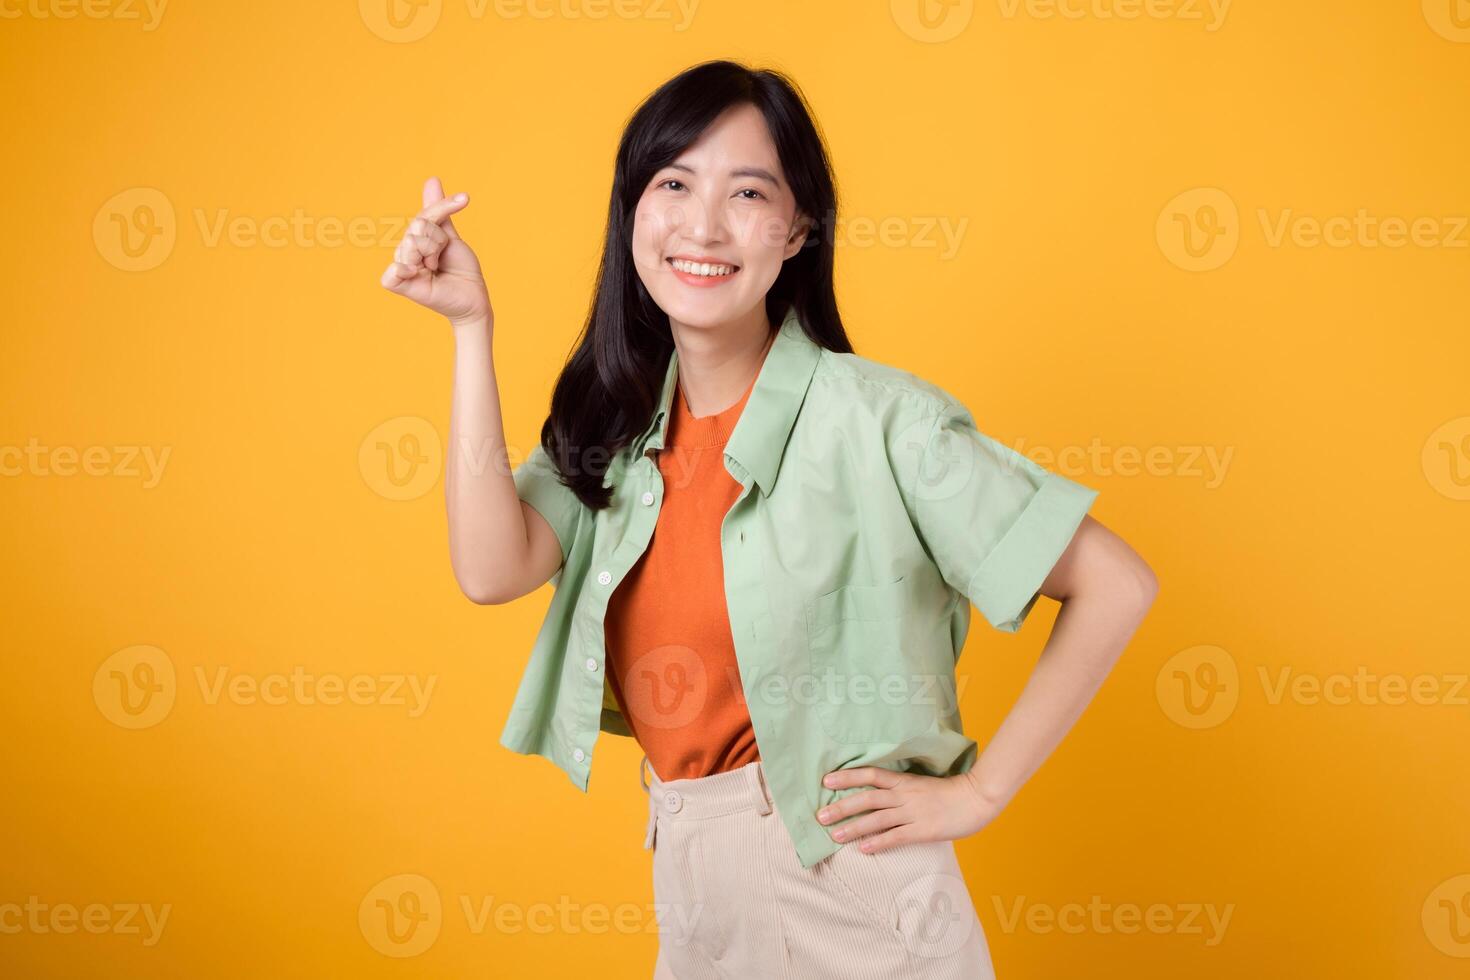 happiness with a young Asian woman in her 30s, dressed in an orange shirt and green jumper. Her mini heart gesture, hand on hip, and gentle smile convey a profound message through body language. photo